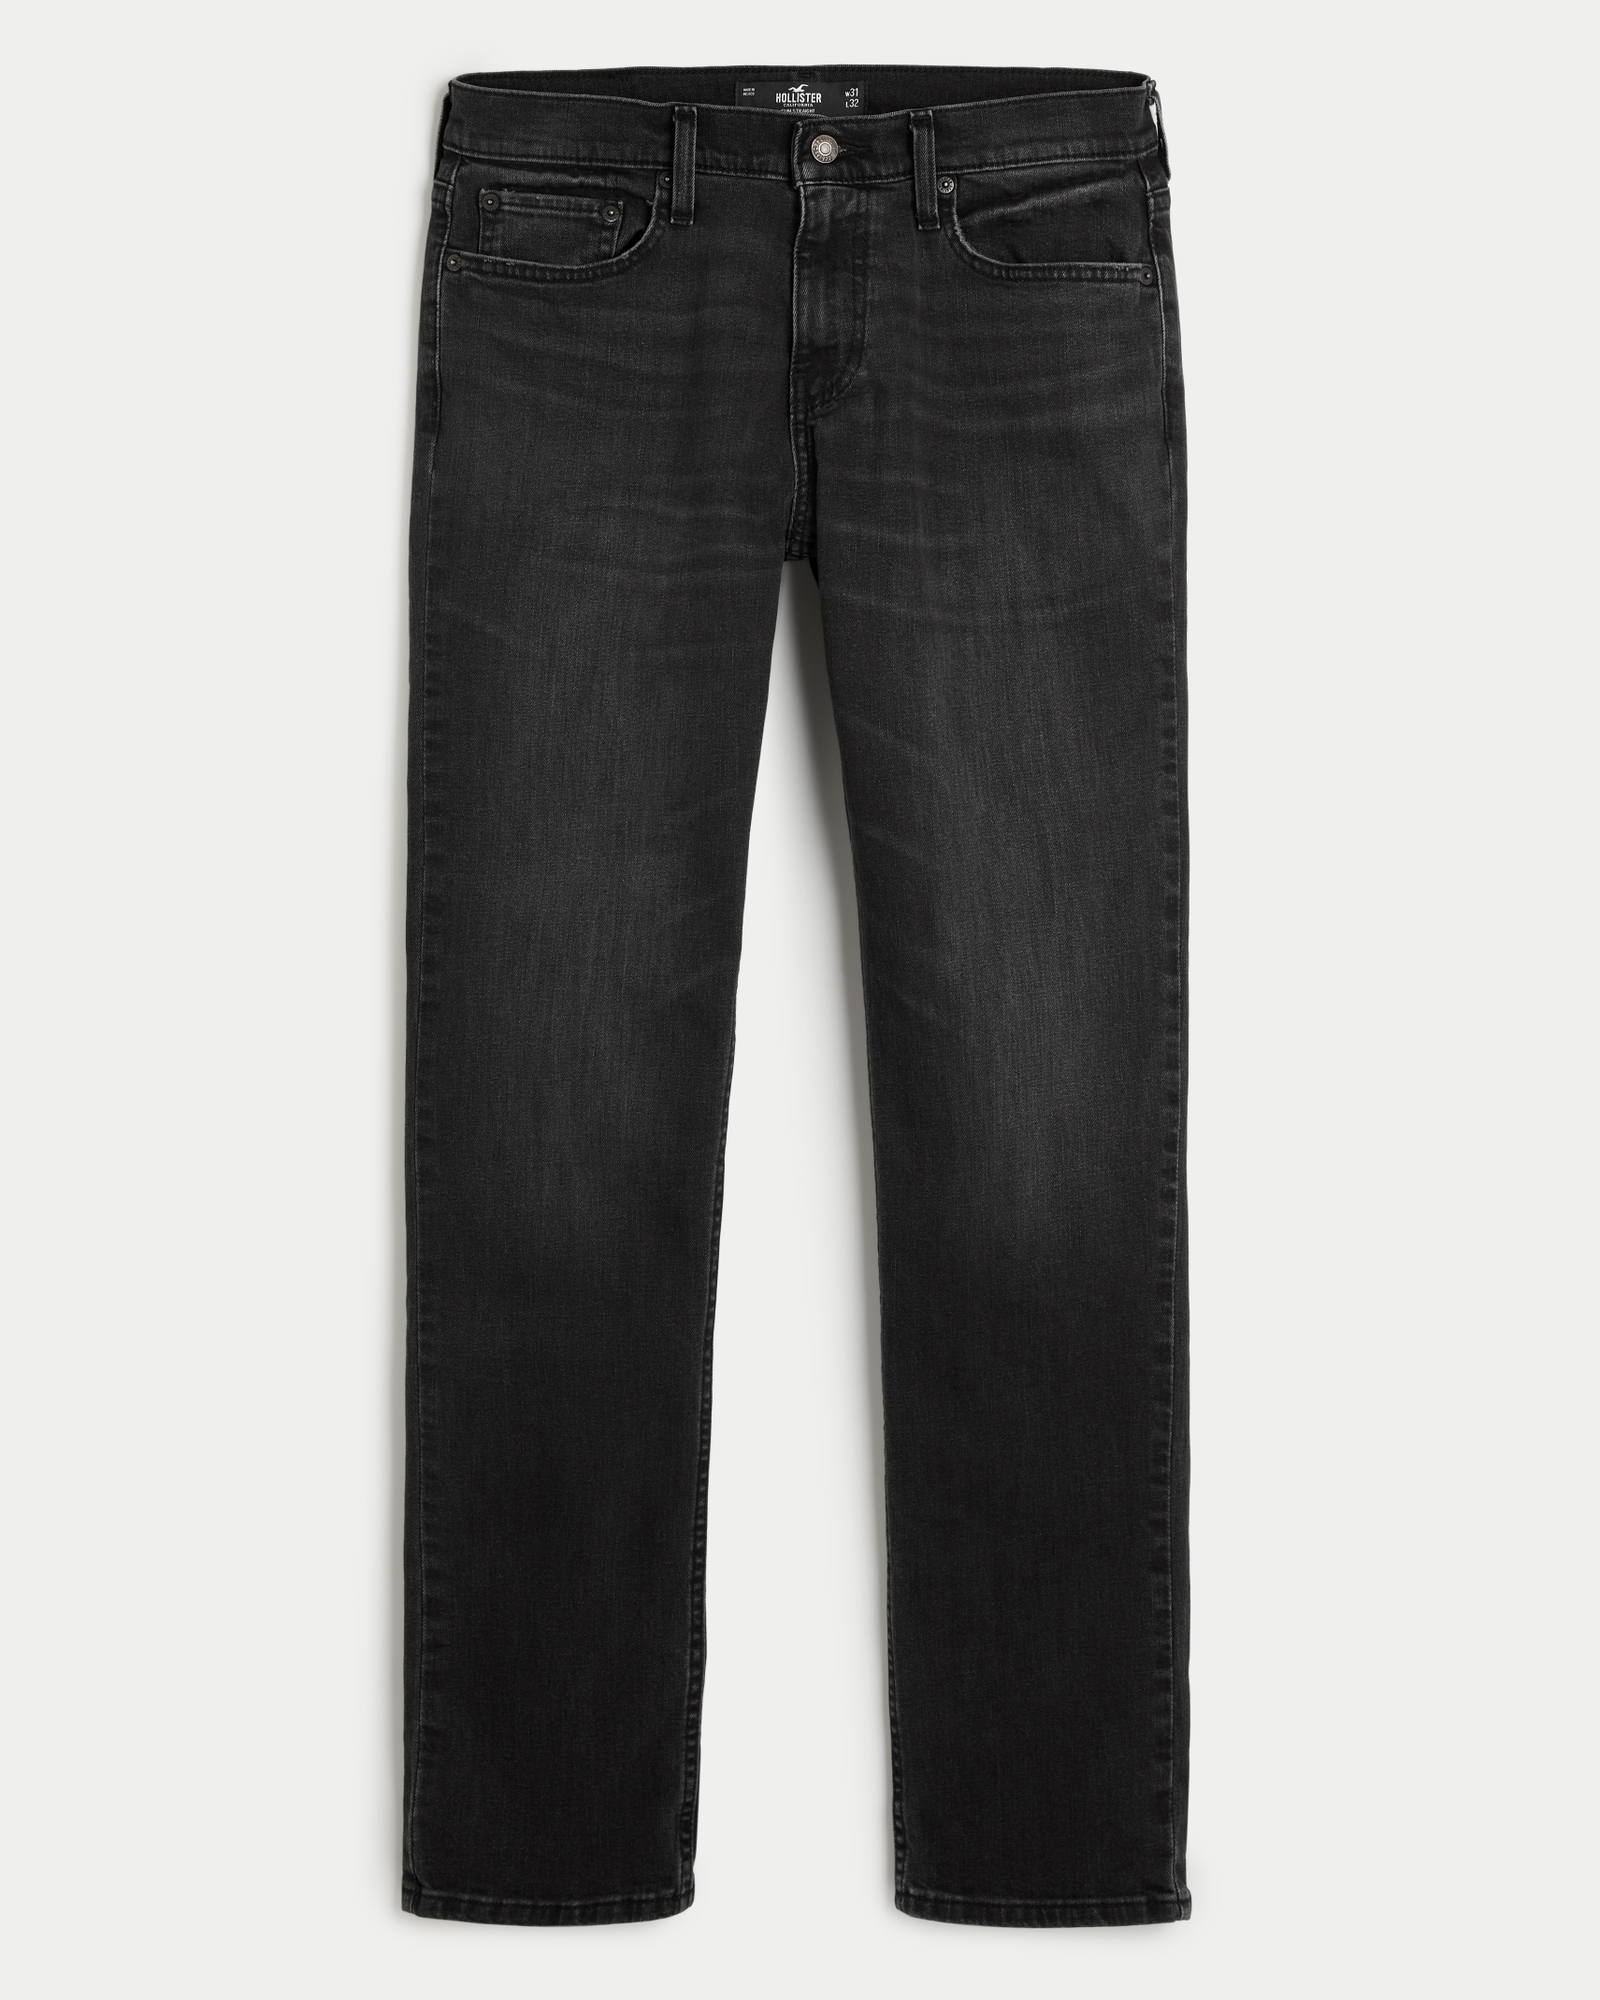 https://img.hollisterco.com/is/image/anf/KIC_331-2102-2296-977_prod1.jpg?policy=product-extra-large